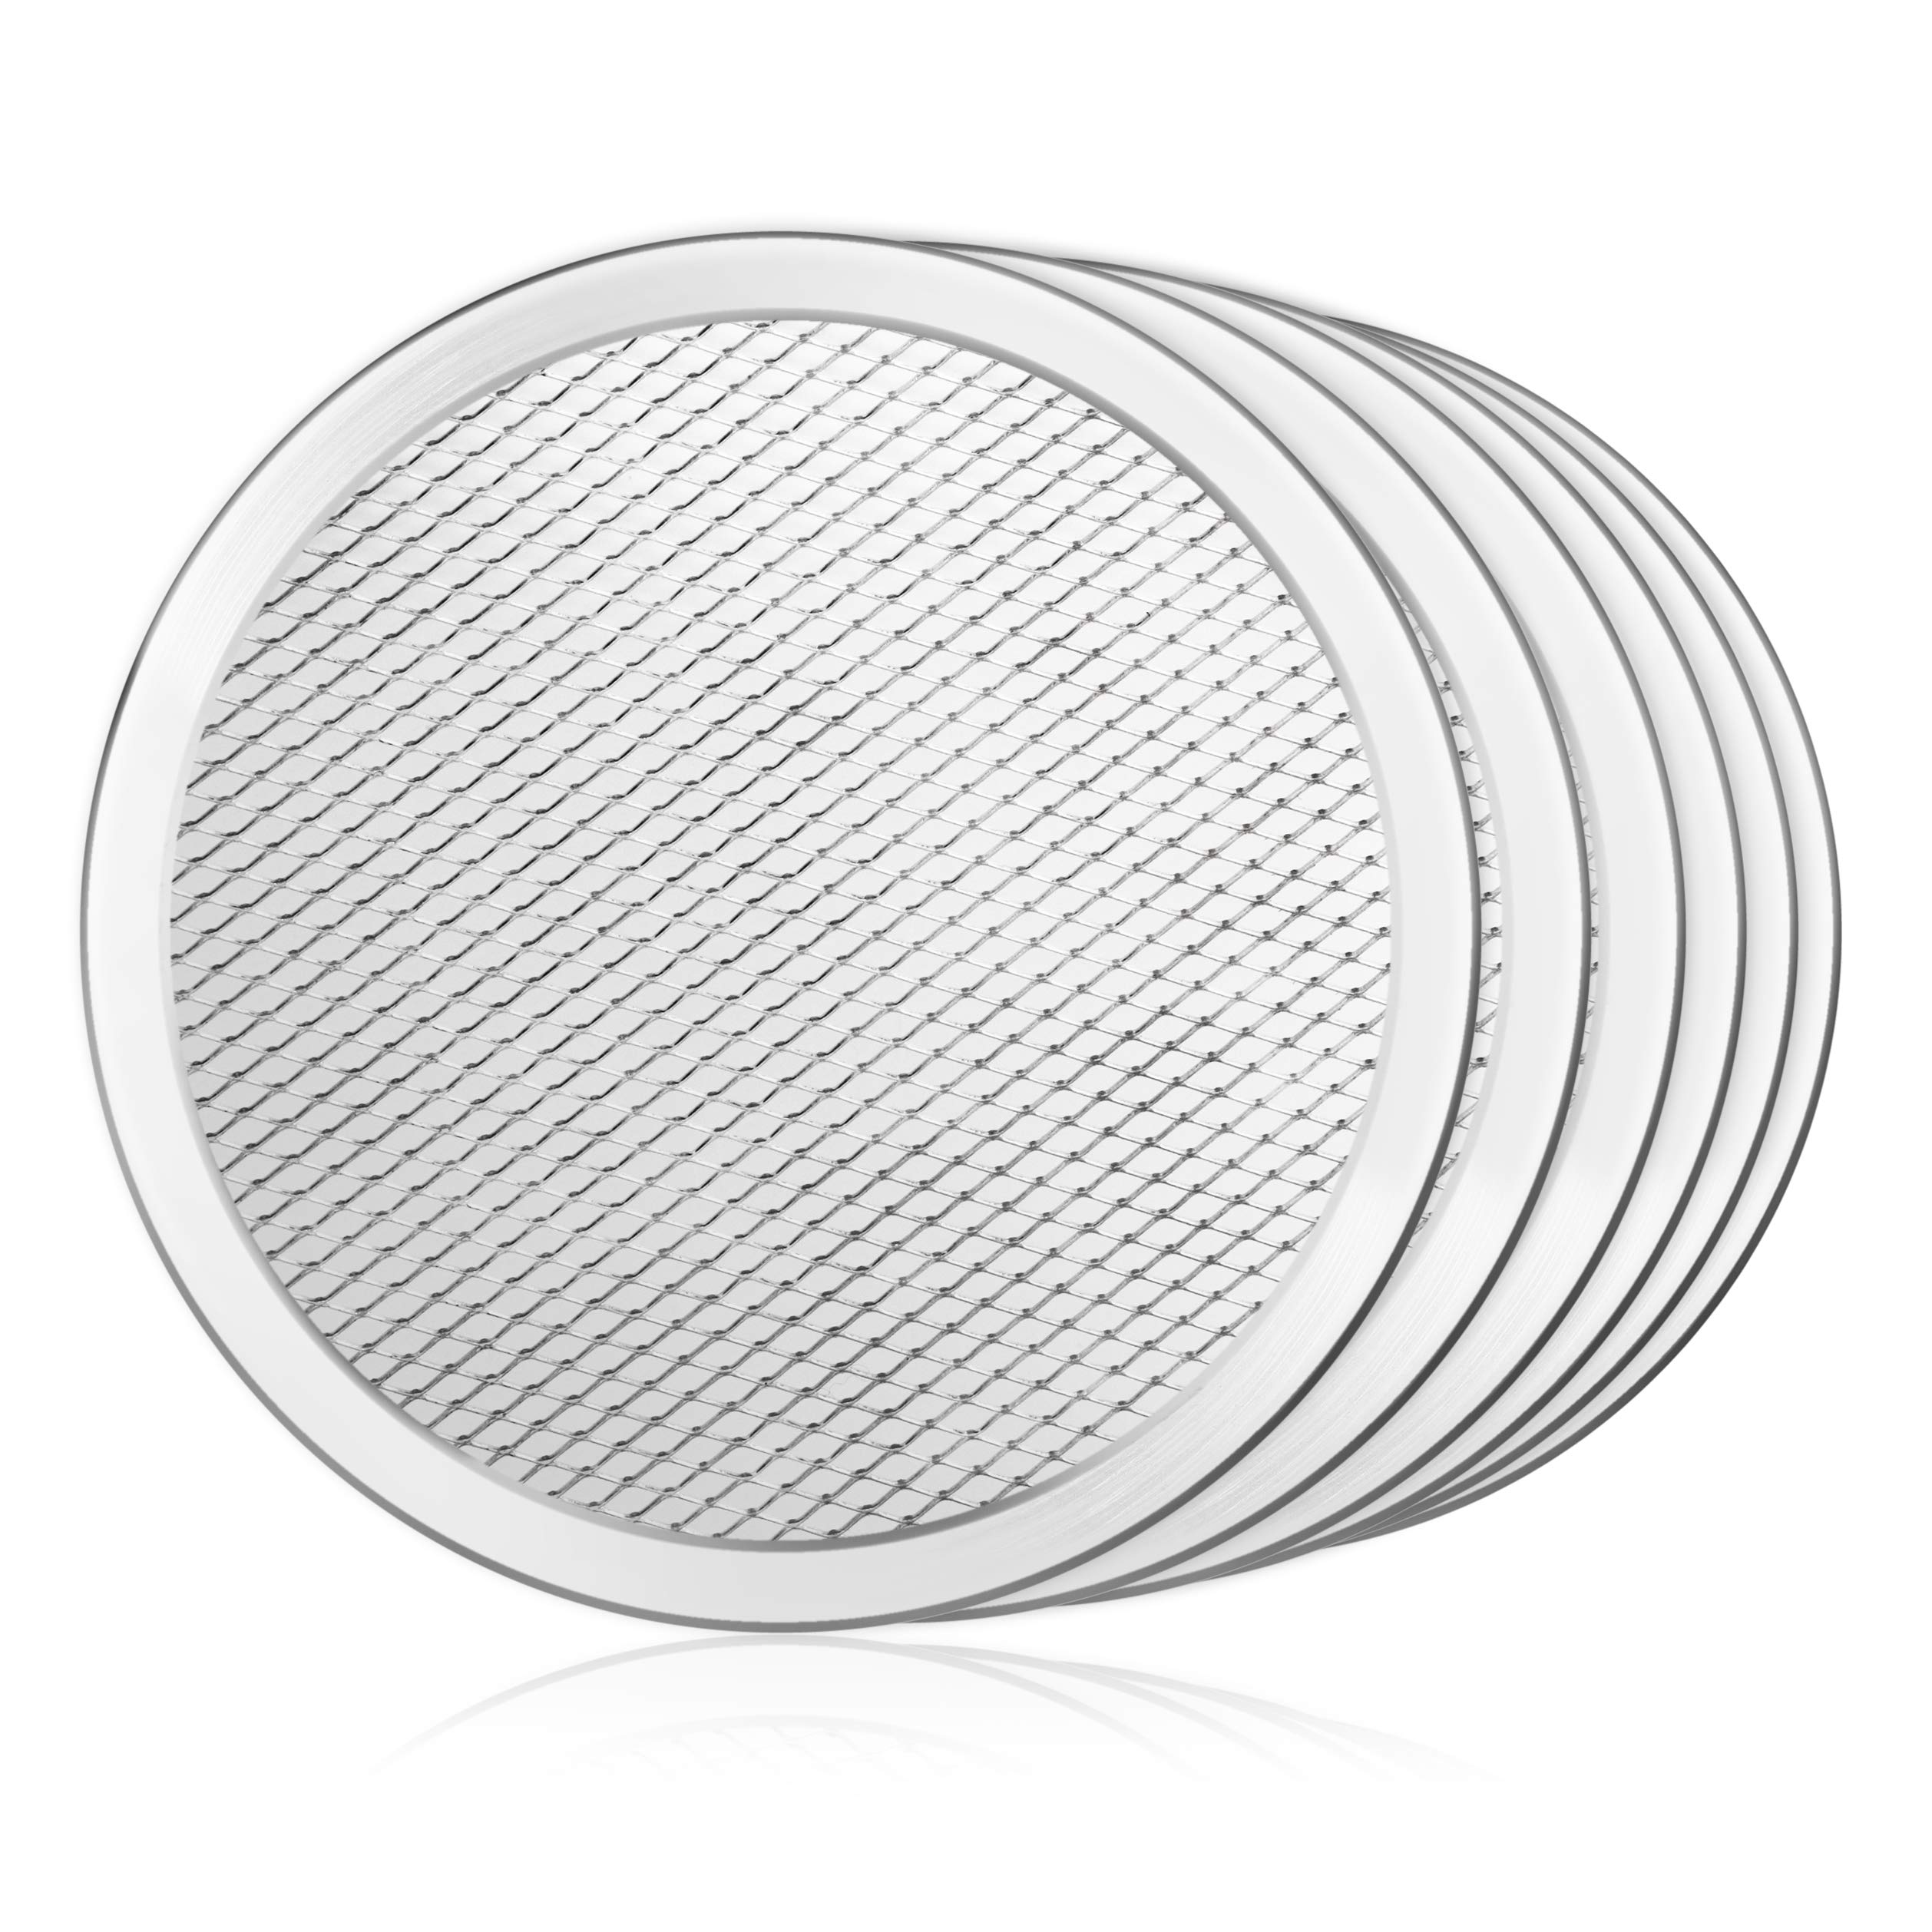 New Star Foodservice 50936 Restaurant-Grade Aluminum Pizza Baking Screen, Seamless, 8-Inch, Pack of 6